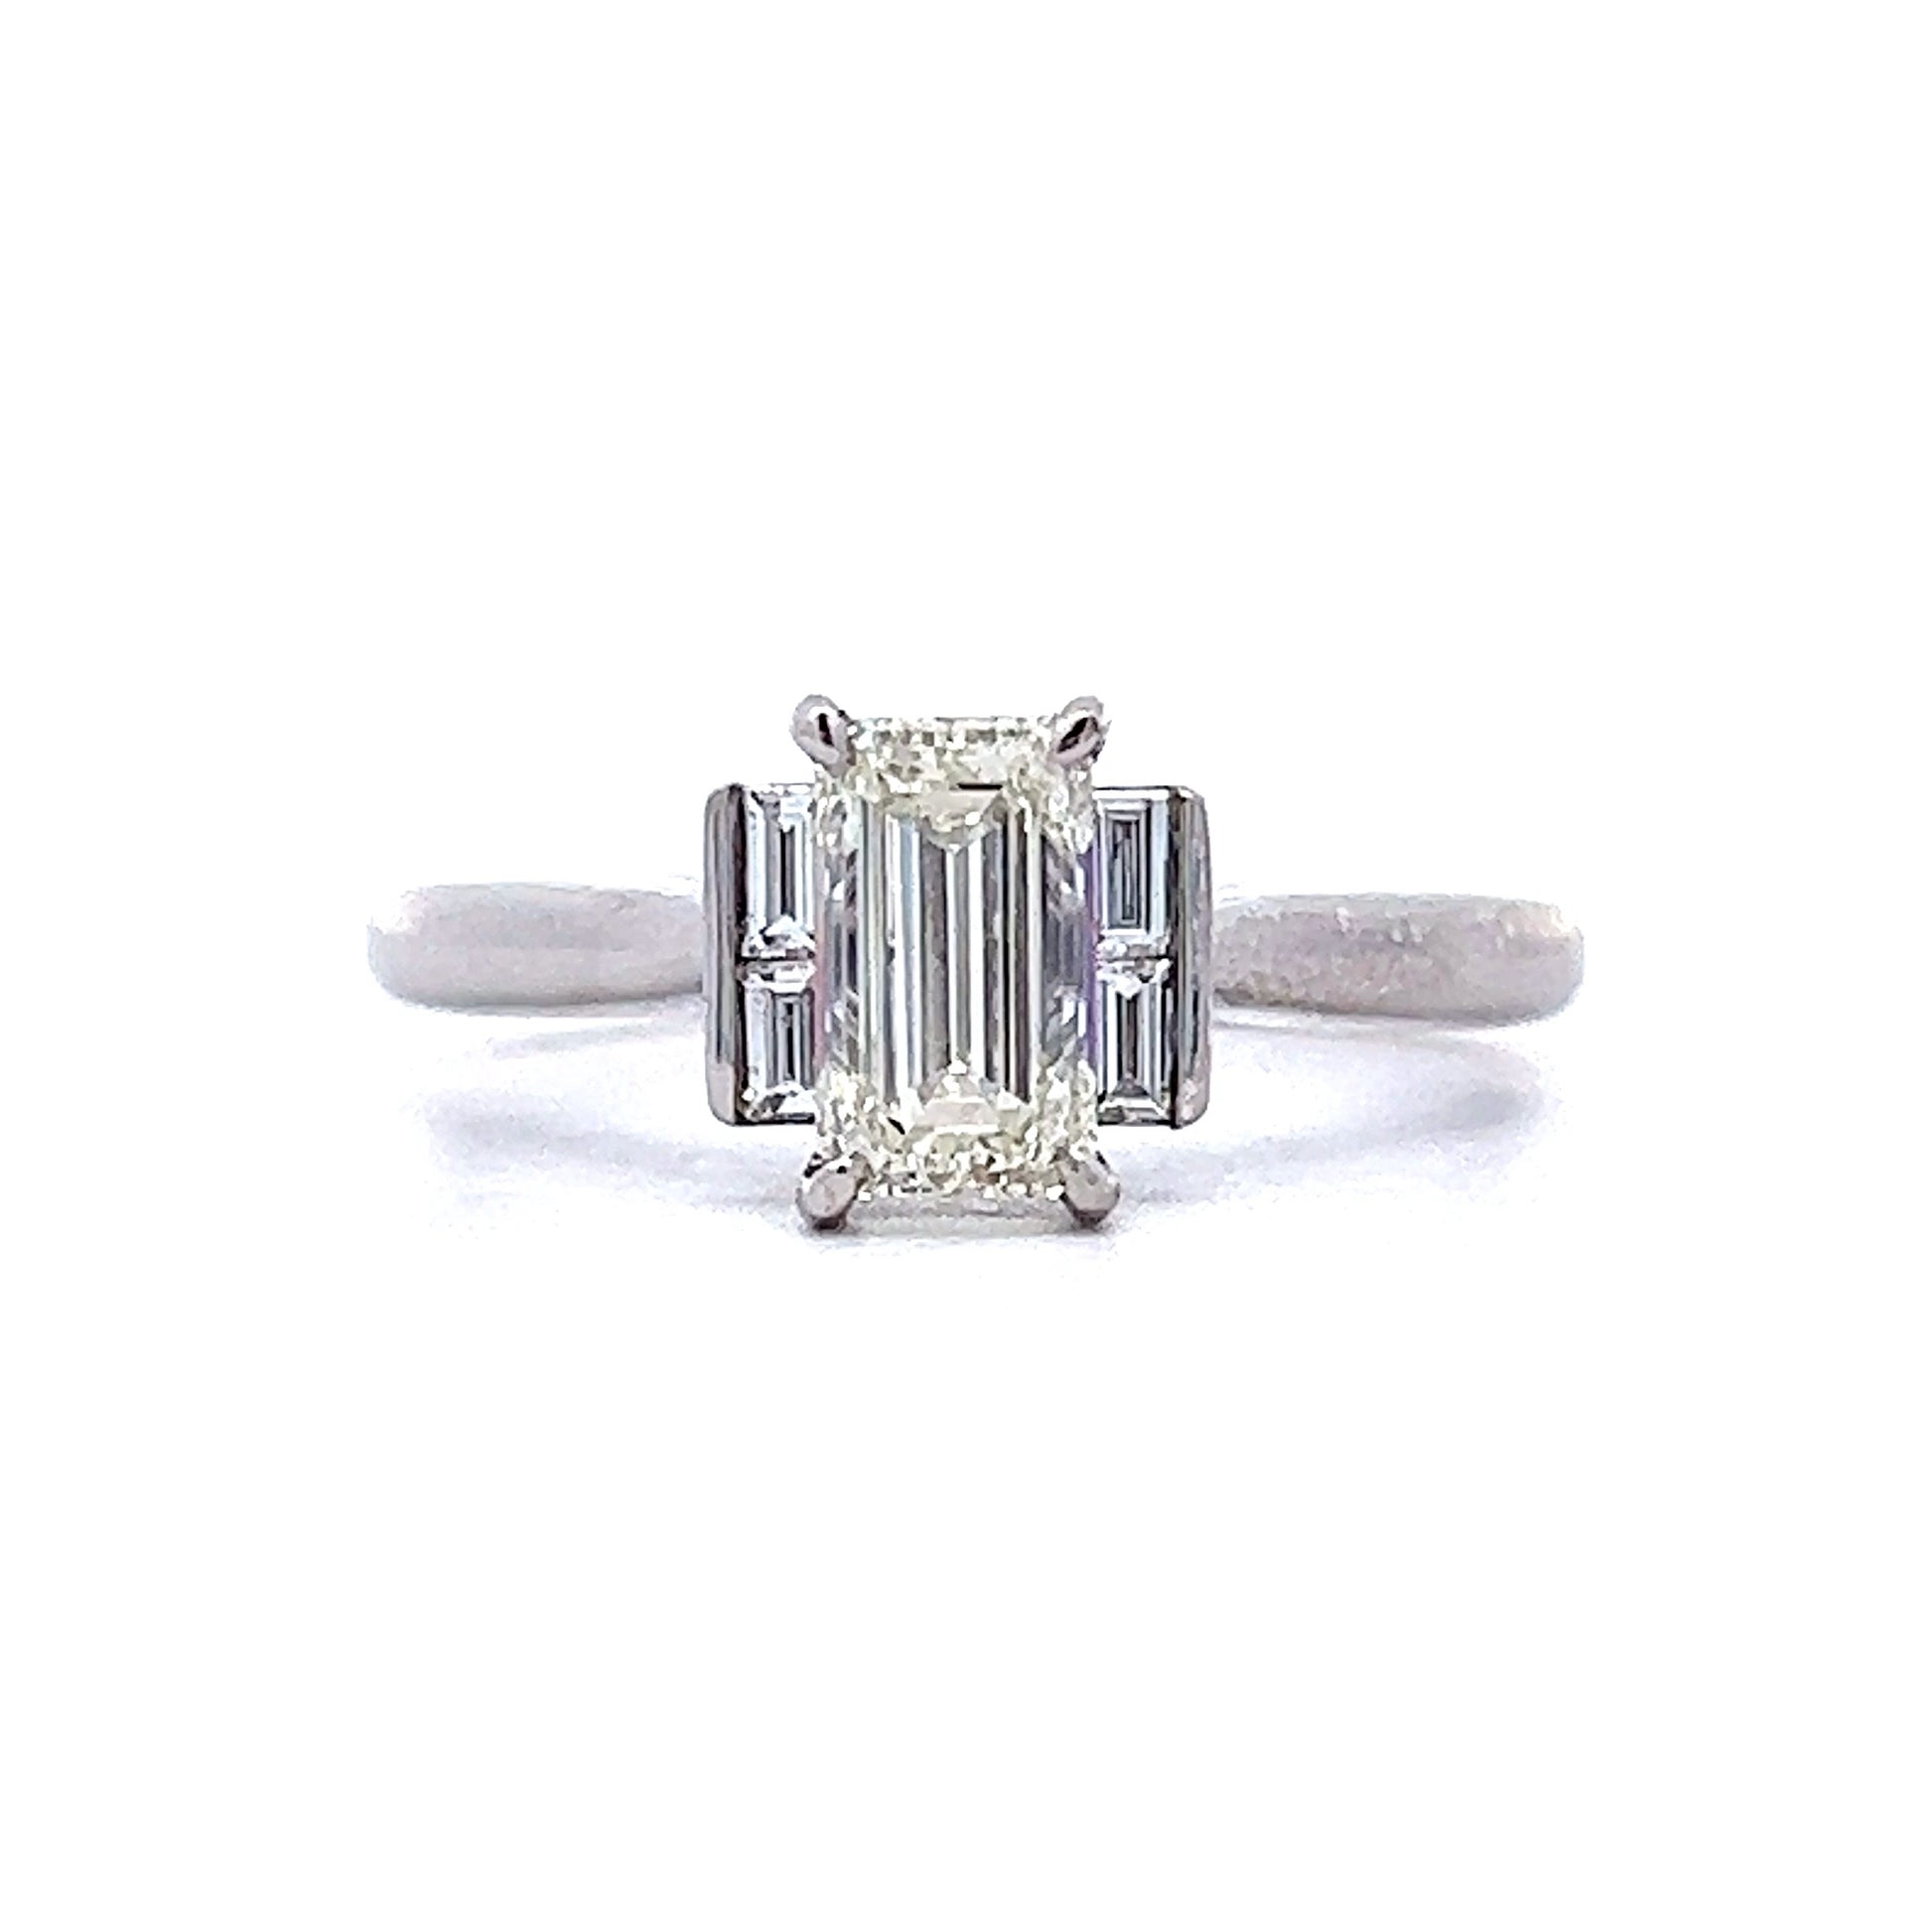 1.03 Three Stone Emerald Cut Engagement Ring in 14k White Gold